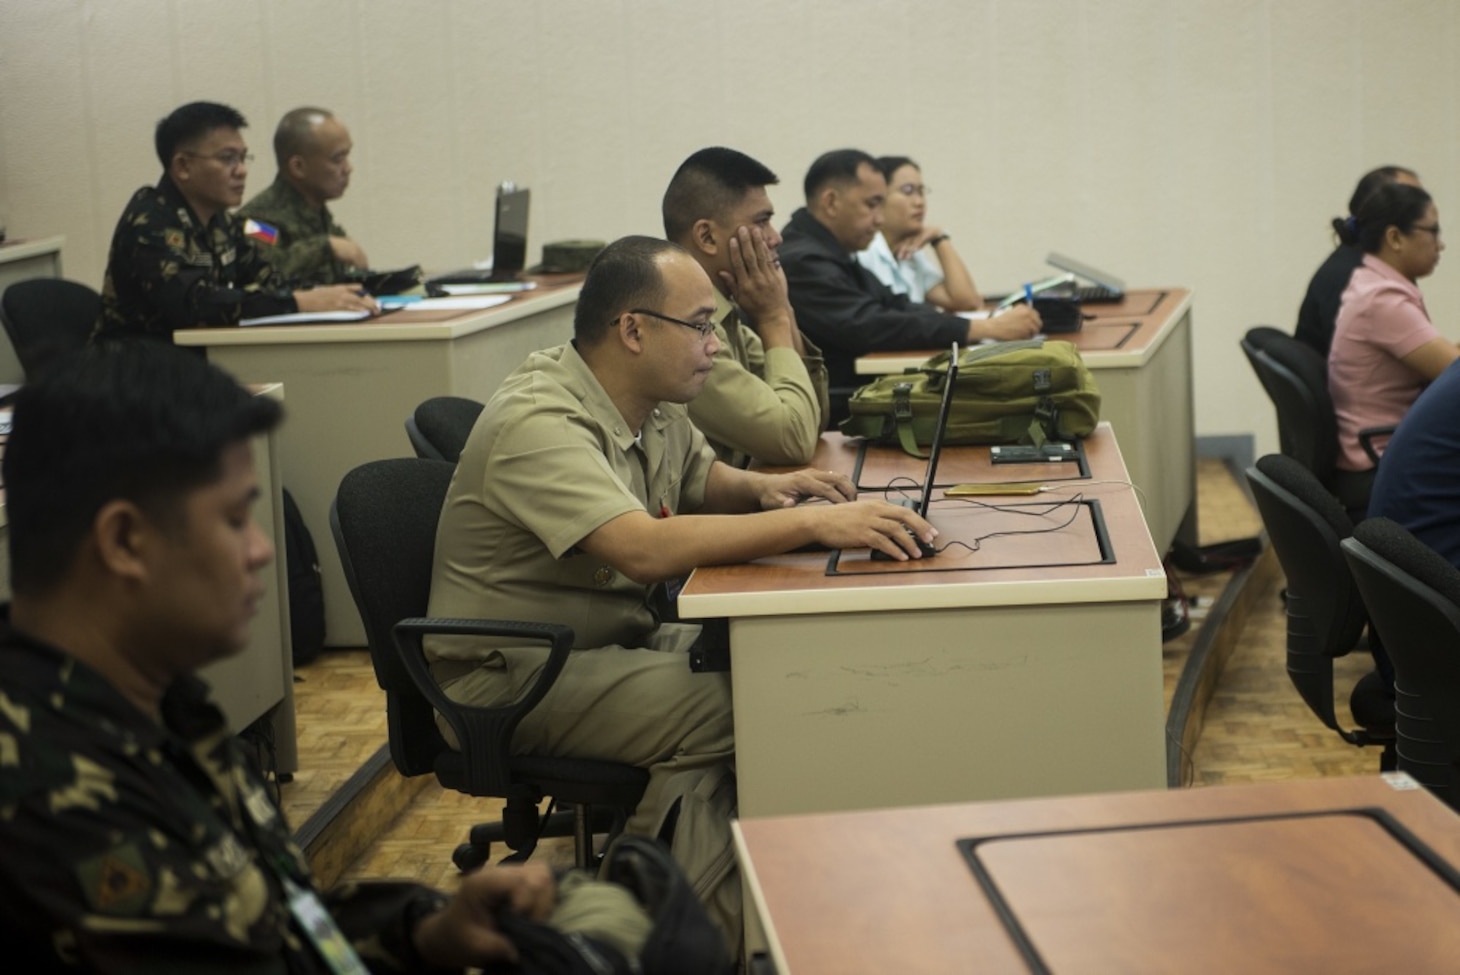 Members of the Armed Forces of the Philippines attend a briefing on cybersecurity and risk management during Balikatan 2017 at Camp Aguinaldo, Quezon City, May 16, 2017. The focus group is part of a four-day cyber security subject matter expert exchange between AFP and U.S. military members designed to discuss information on the fundamentals of cybersecurity and network risk management. Balikatan is an annual U.S.-Philippine bilateral military exercise focused on a variety of missions, including humanitarian assistance and disaster relief, counterterrorism, and other combined military operations.